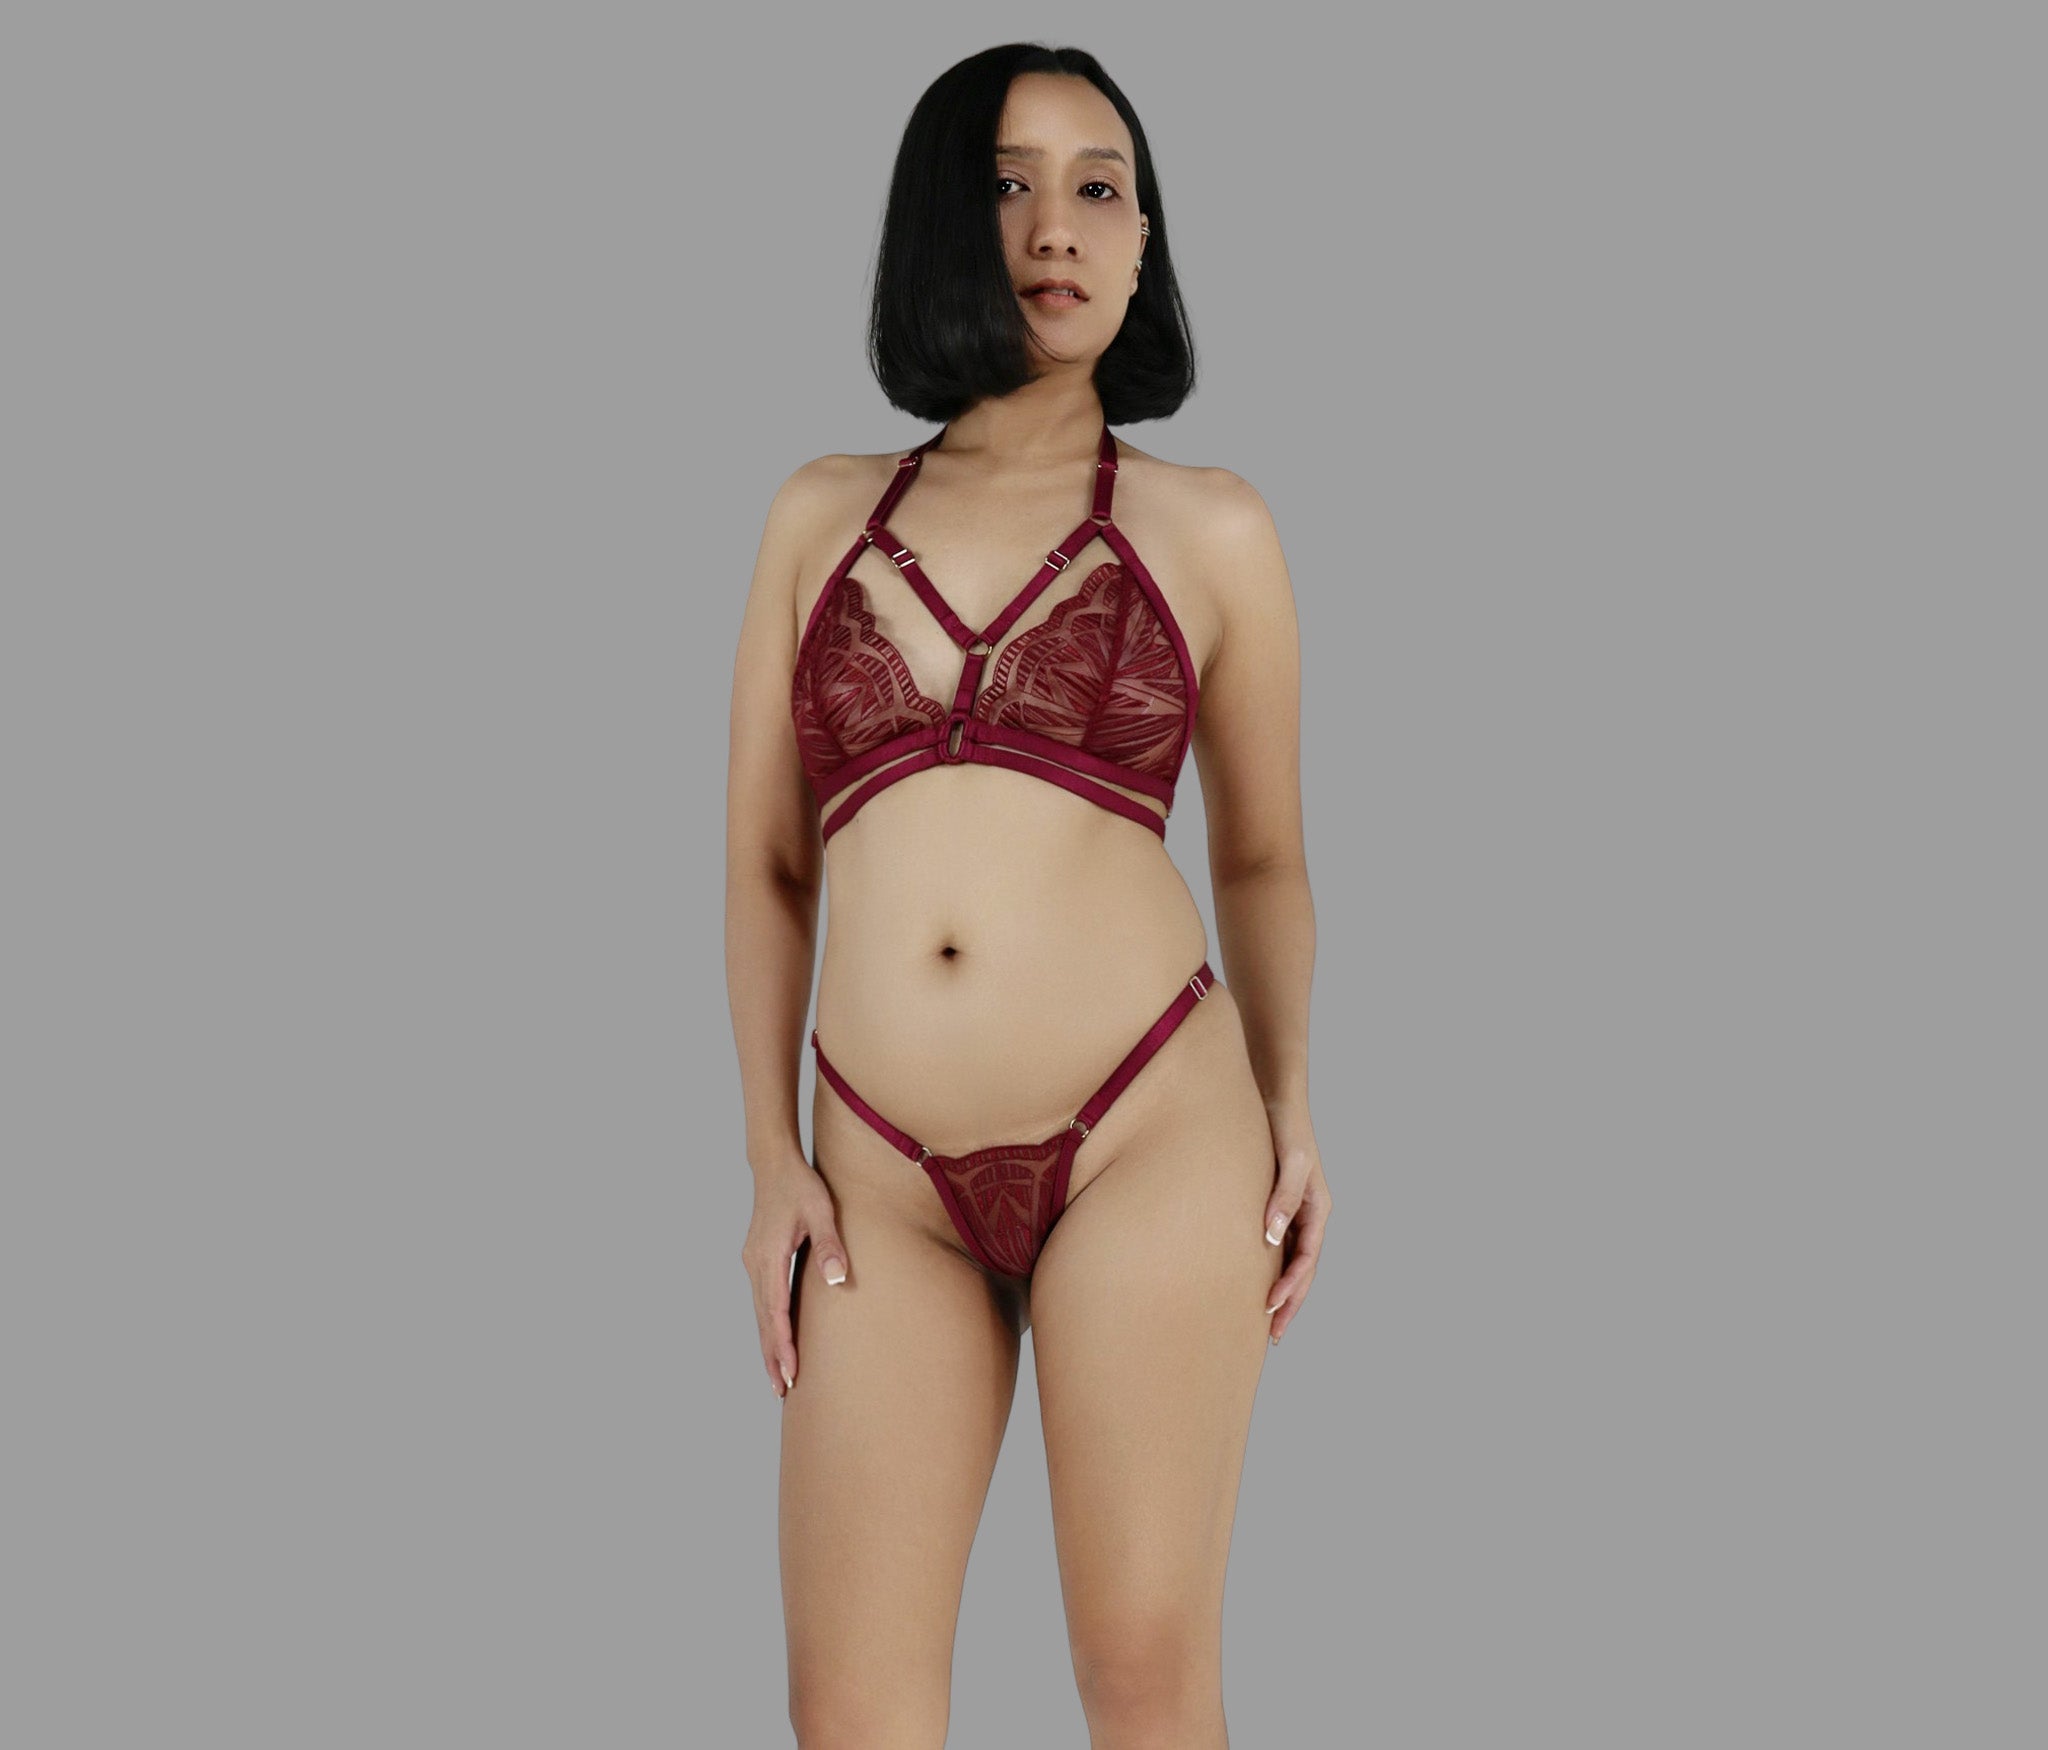 Sexy see through lingerie set in burgundy red lace strappy harness bra sheer adjustable panties g string - Ange Déchu